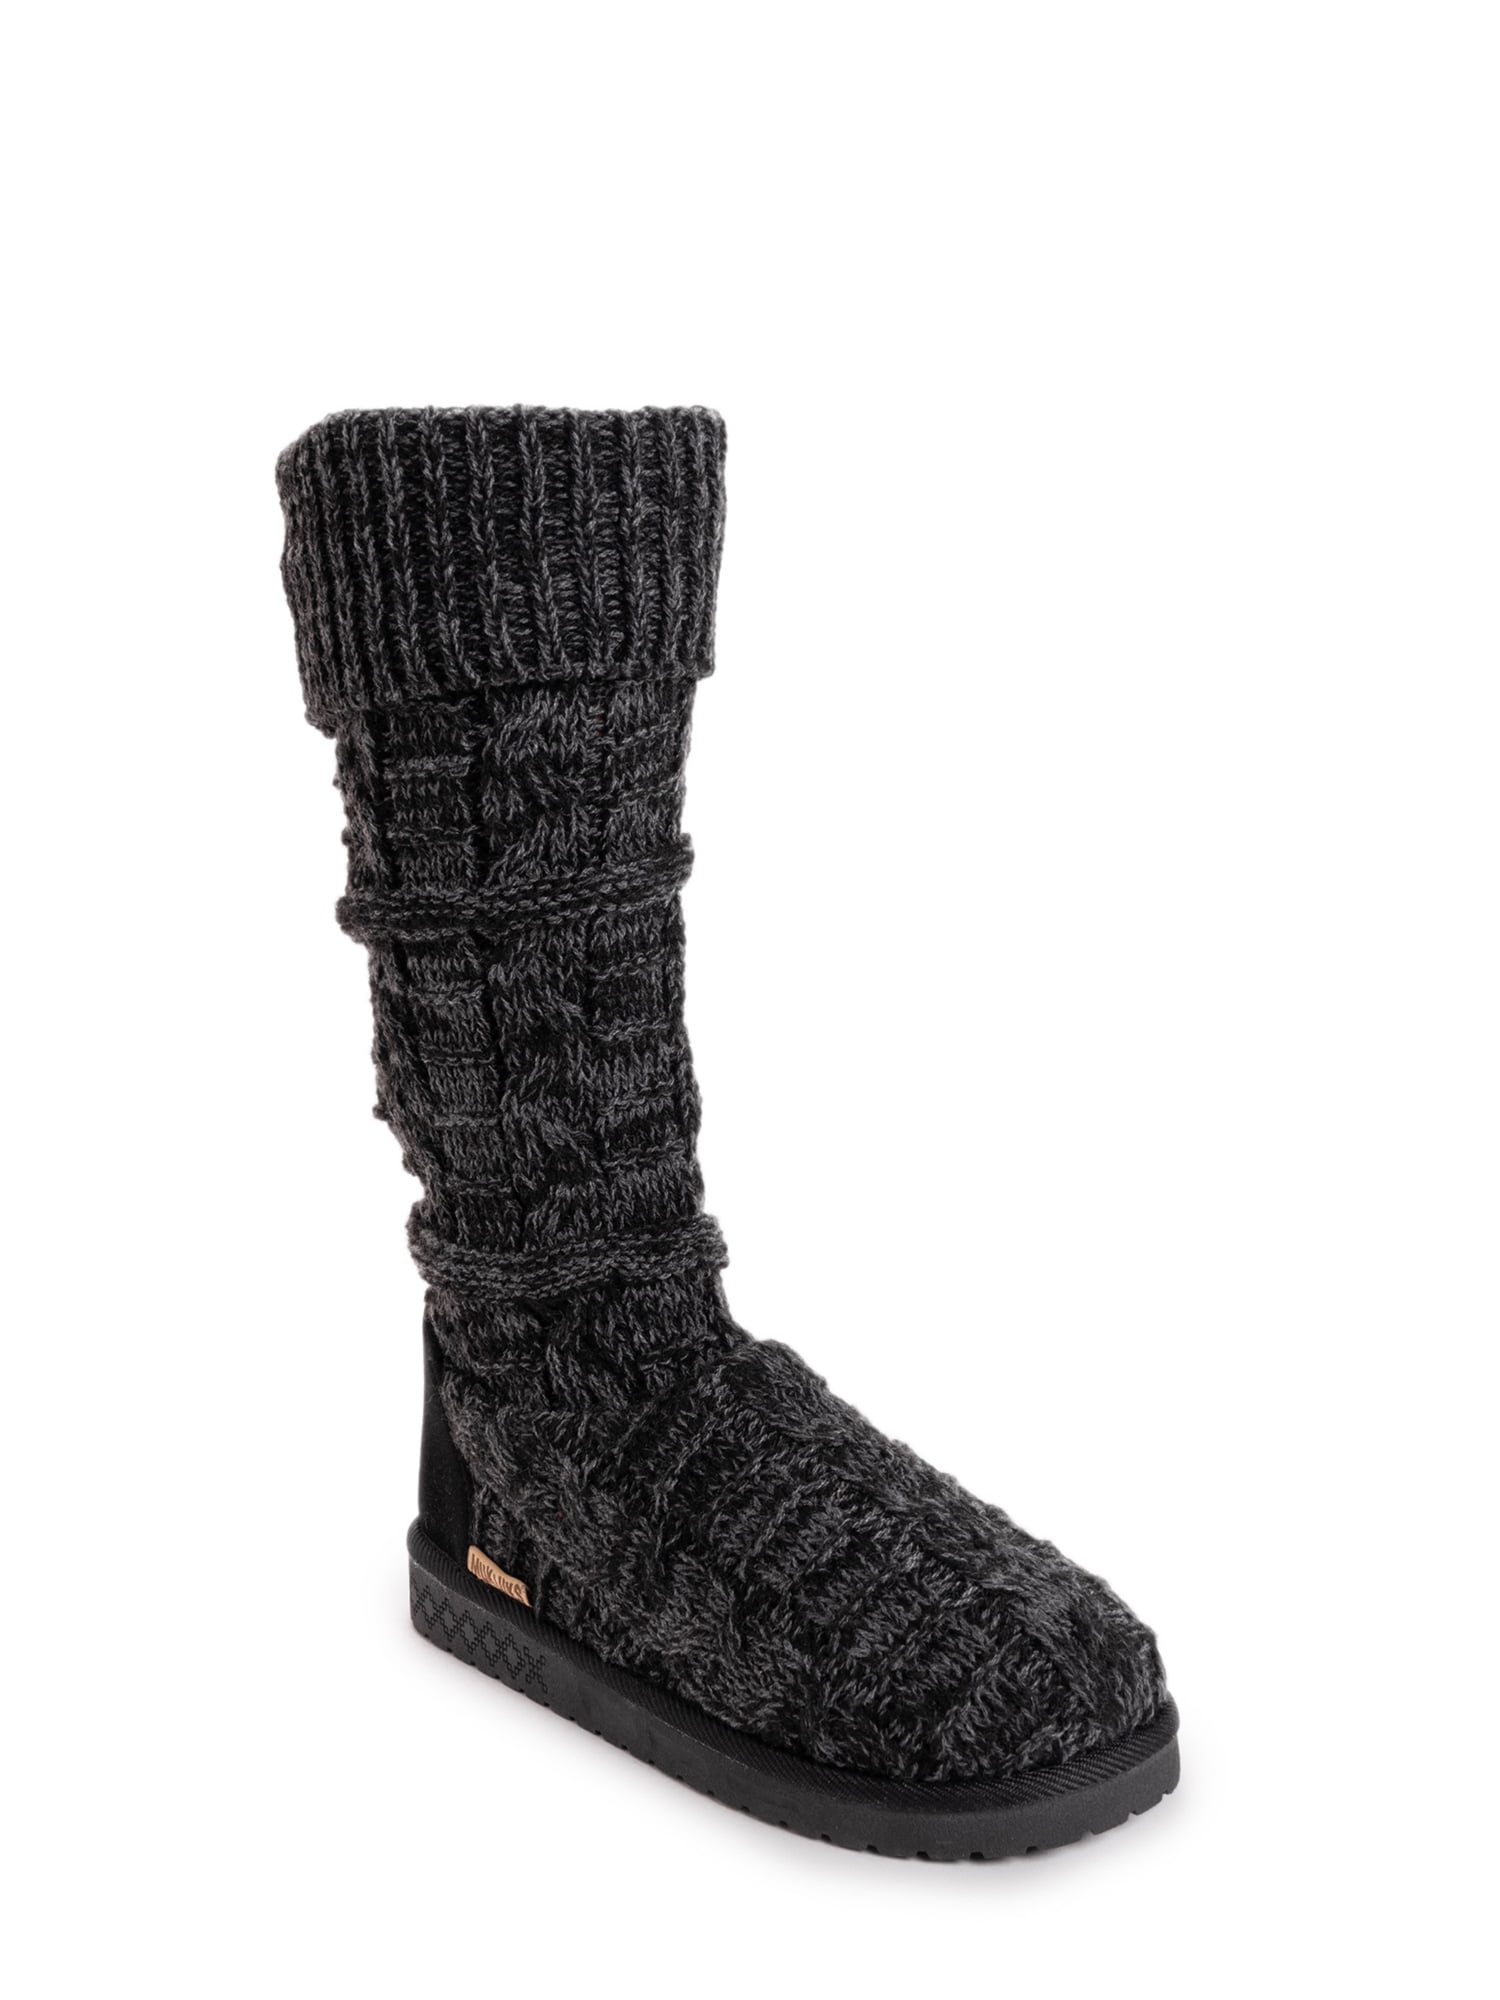 women's slouch boots clearance